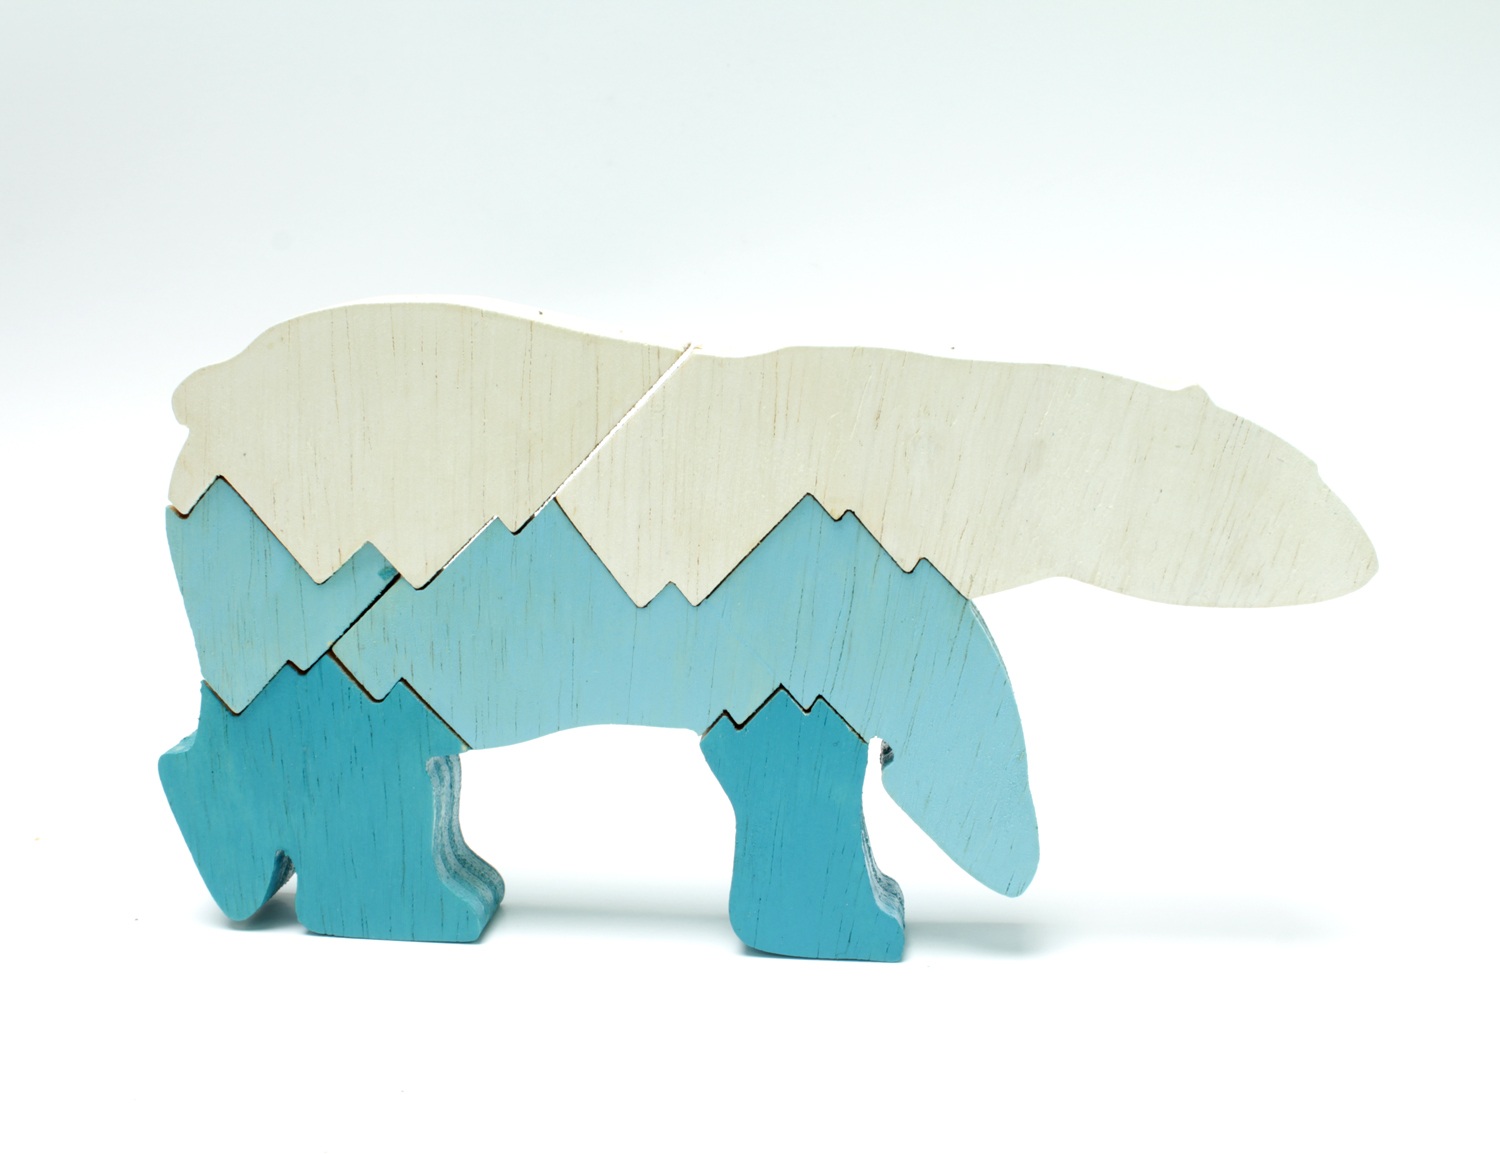 Polar Bear Puzzle and Room Decor with Ice Cap Pieces